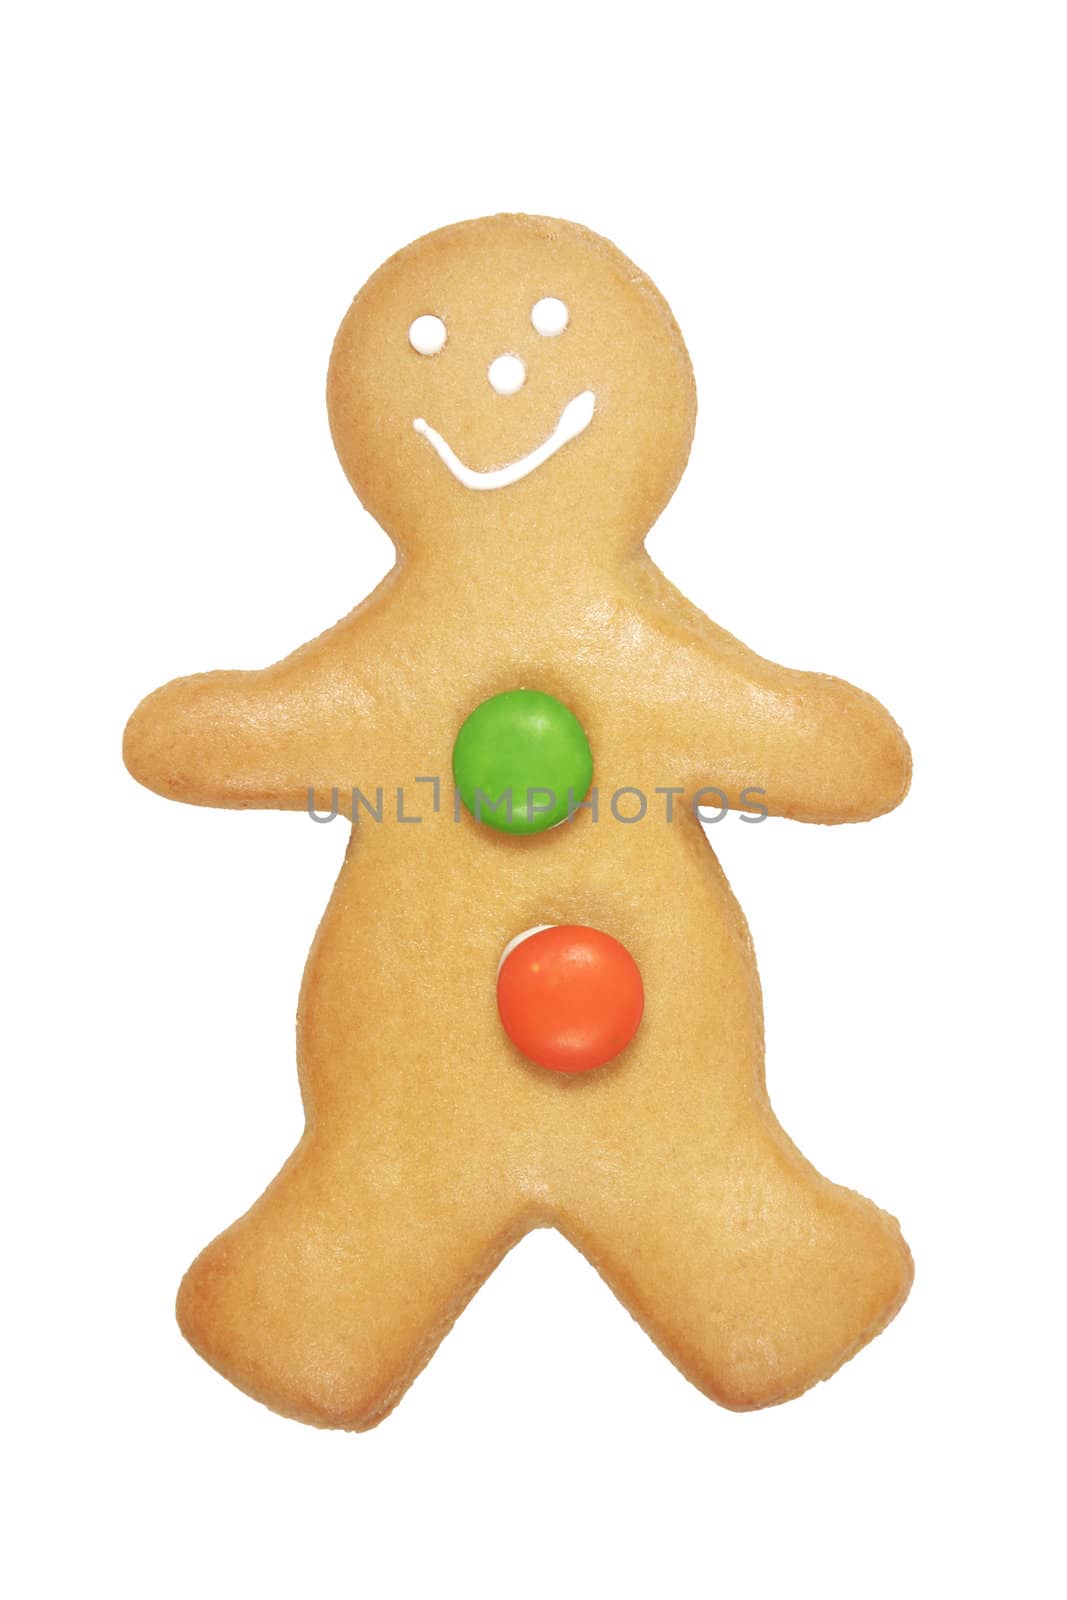 Gingerbread Man Cookie On A White Background